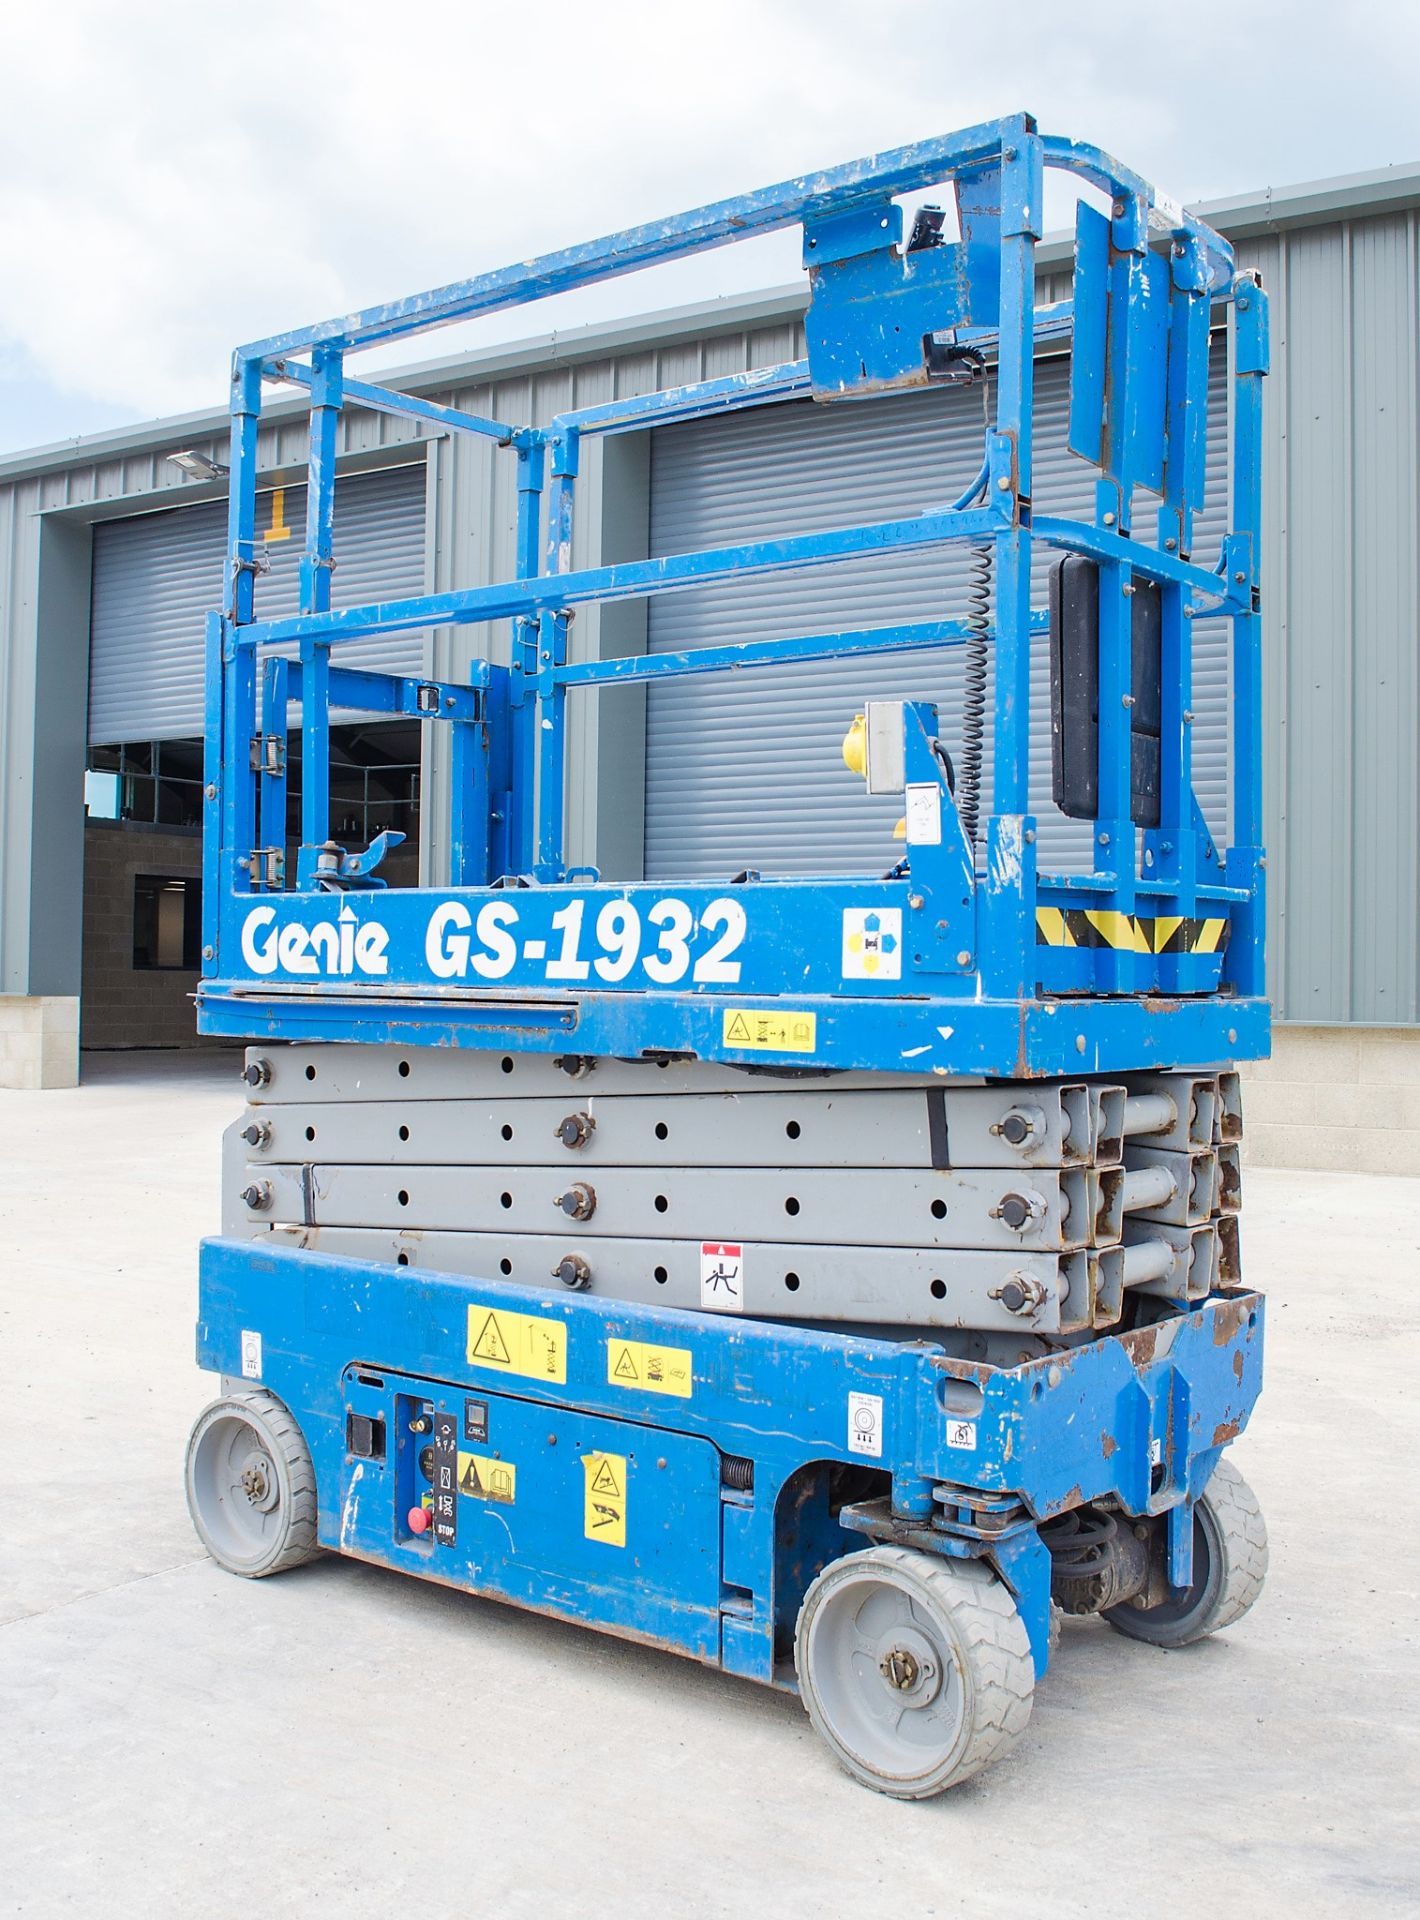 Genie GS 1932 battery electric scissor lift Year: 2007 Recorded Hours: 352 08830038